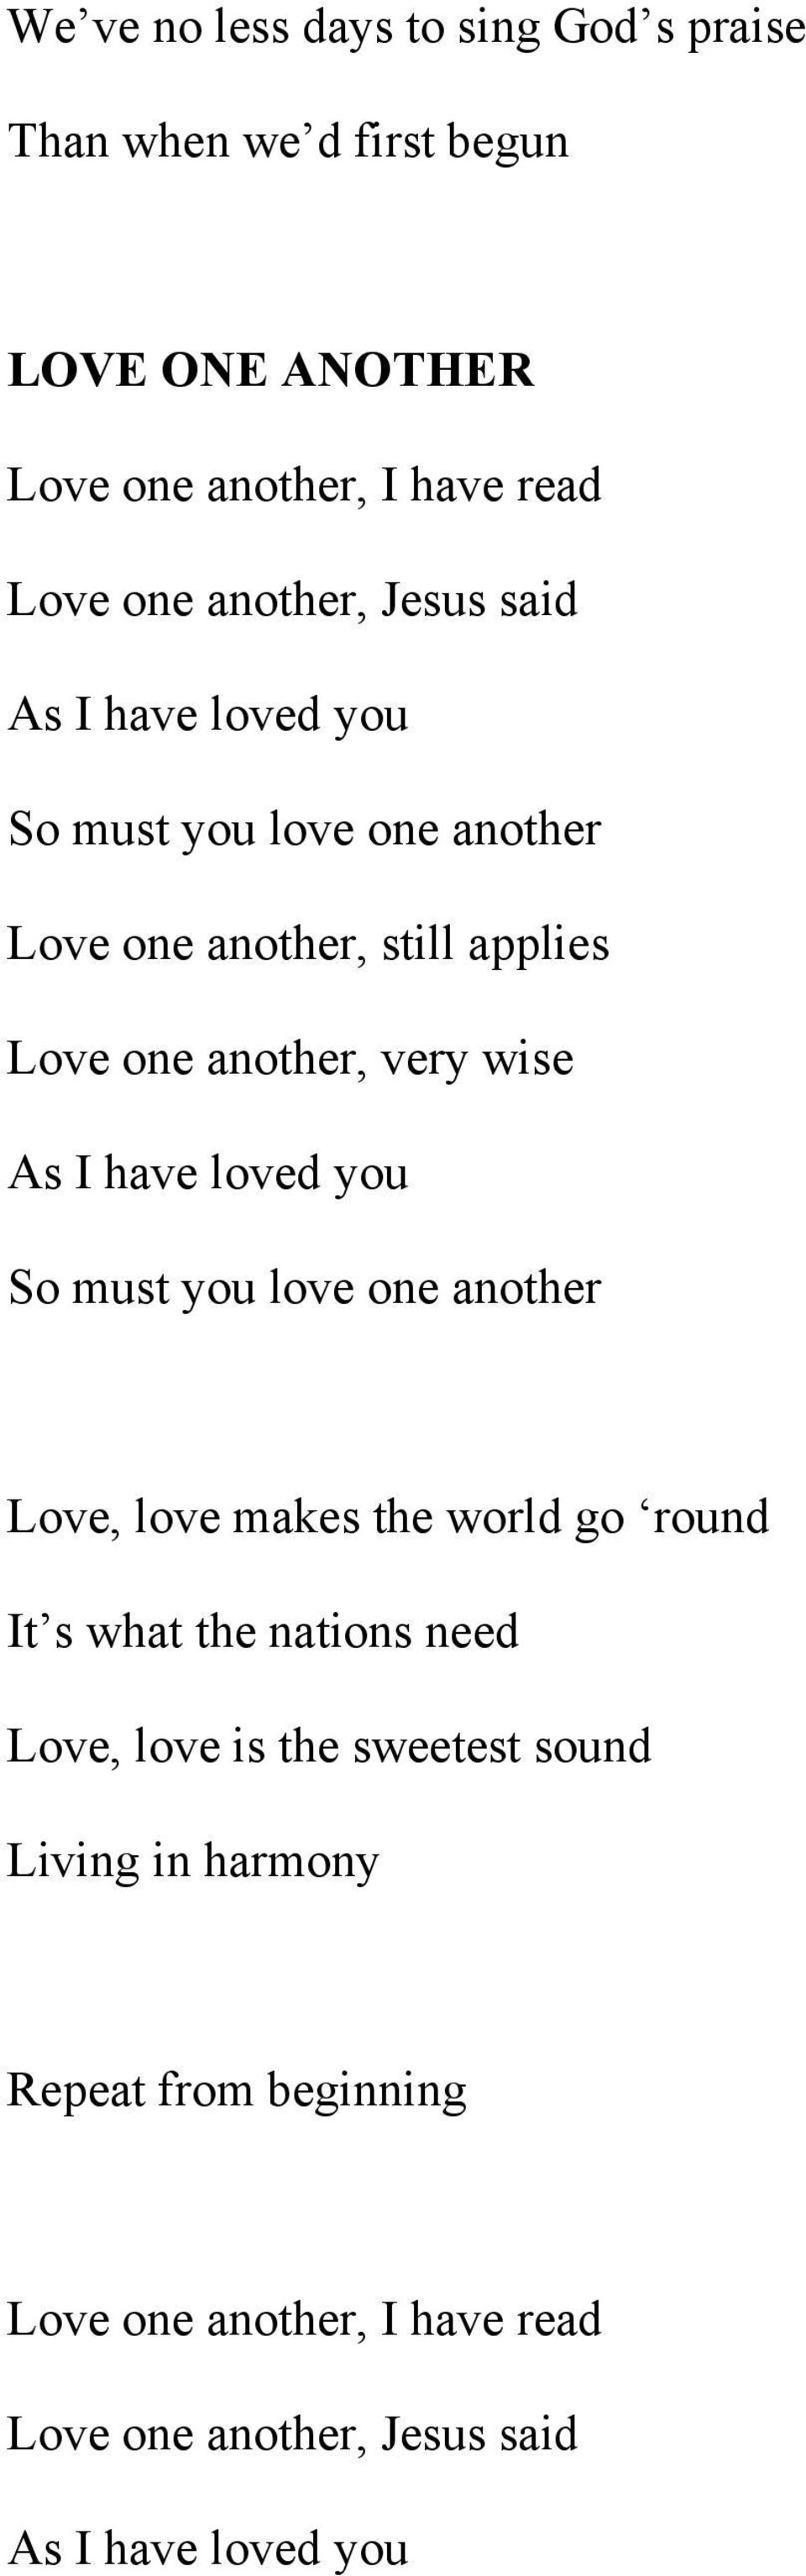 As I have loved you So must you love one another Love, love makes the world go round It s what the nations need Love, love is